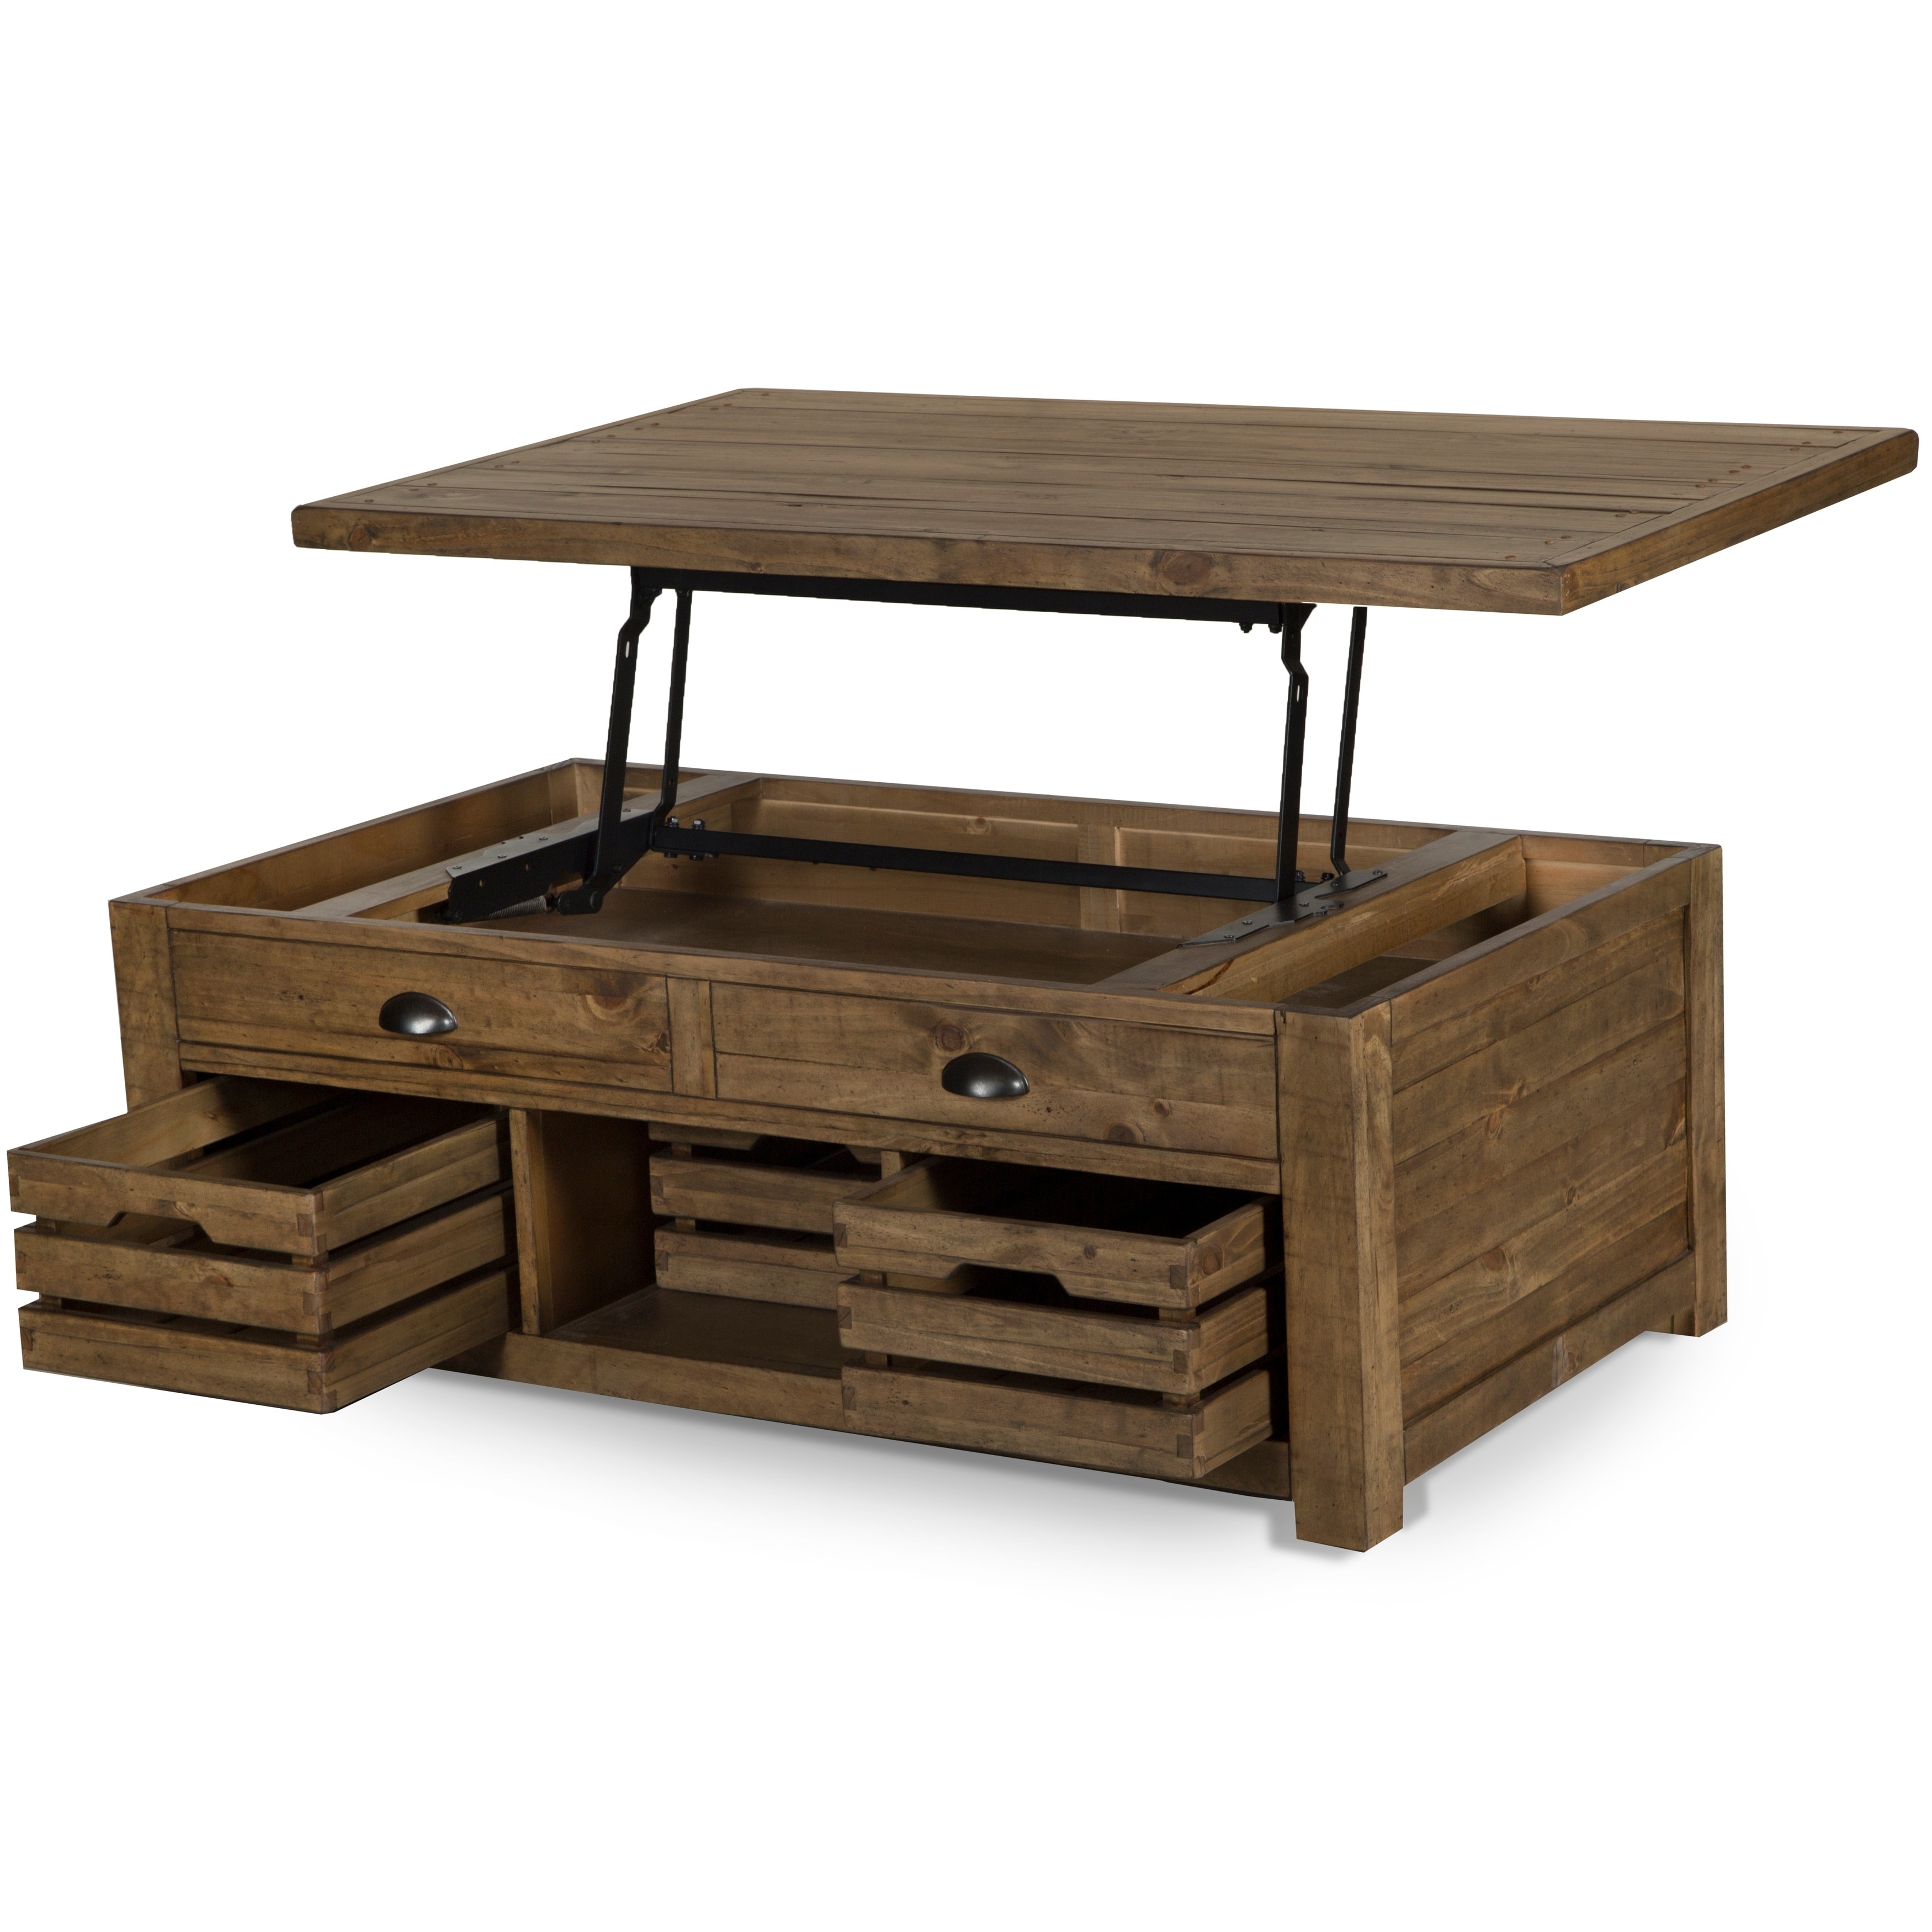 Stratton Rustic Warm Nutmeg Lift Top Storage Coffee Table With Casters Overstock 19843973